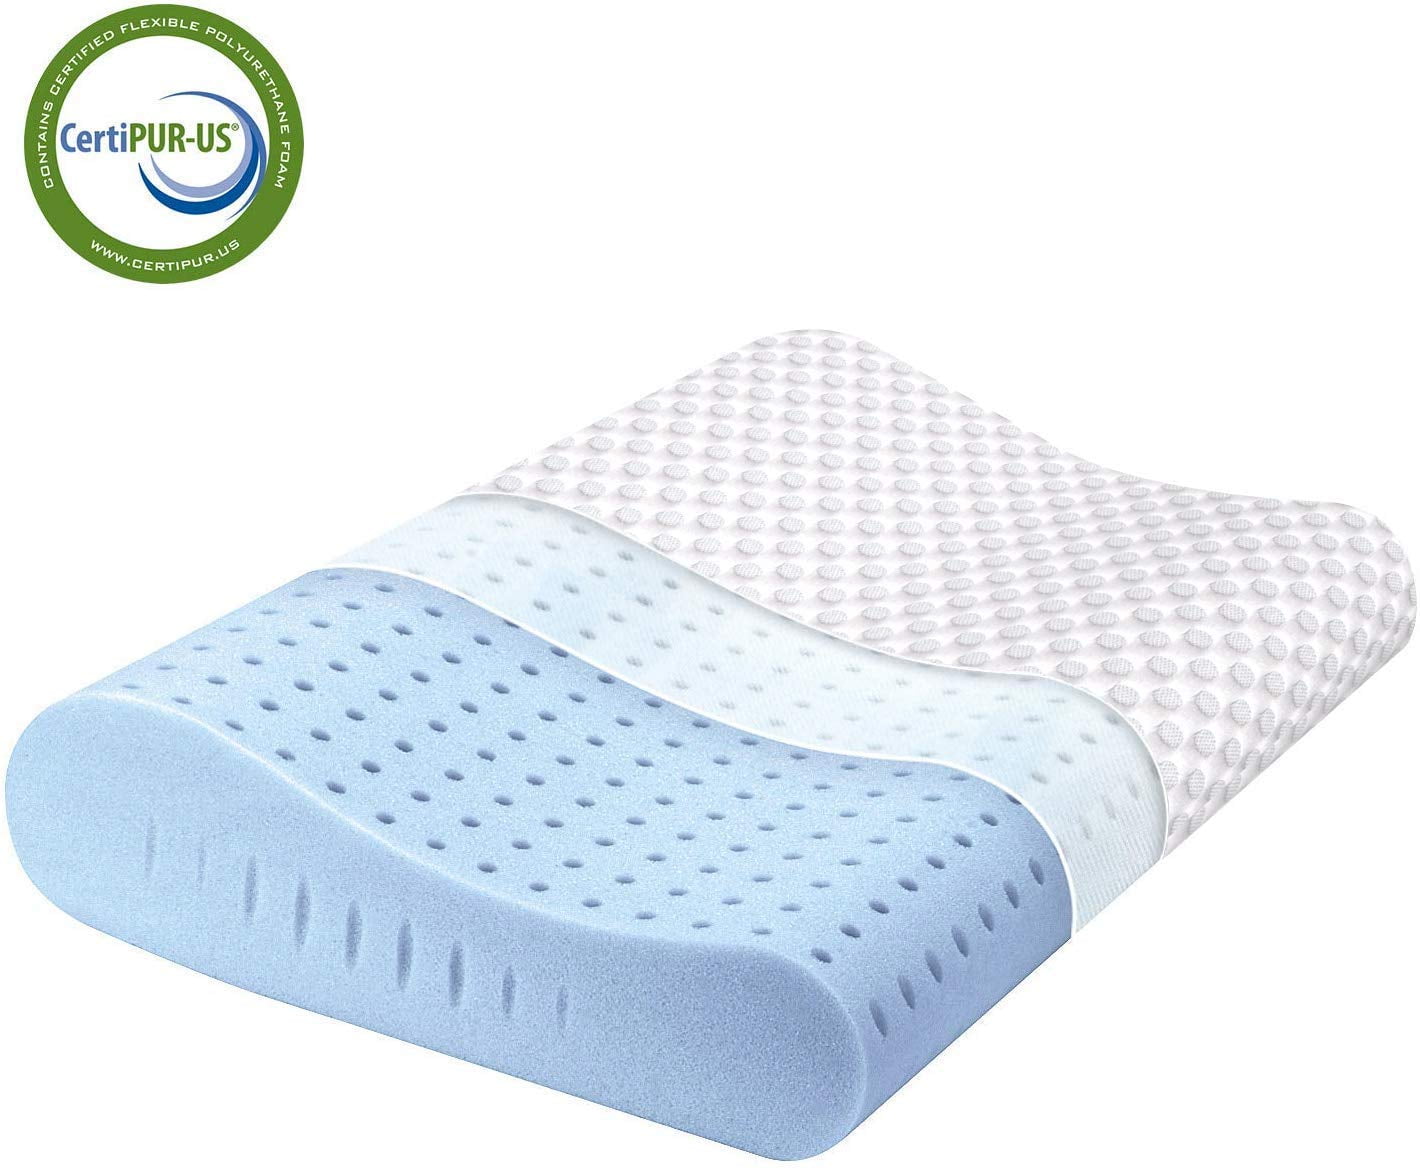 Cooling Memory Foam Pillow Orthopaedic Hypoallergenic Head Neck Back Support 